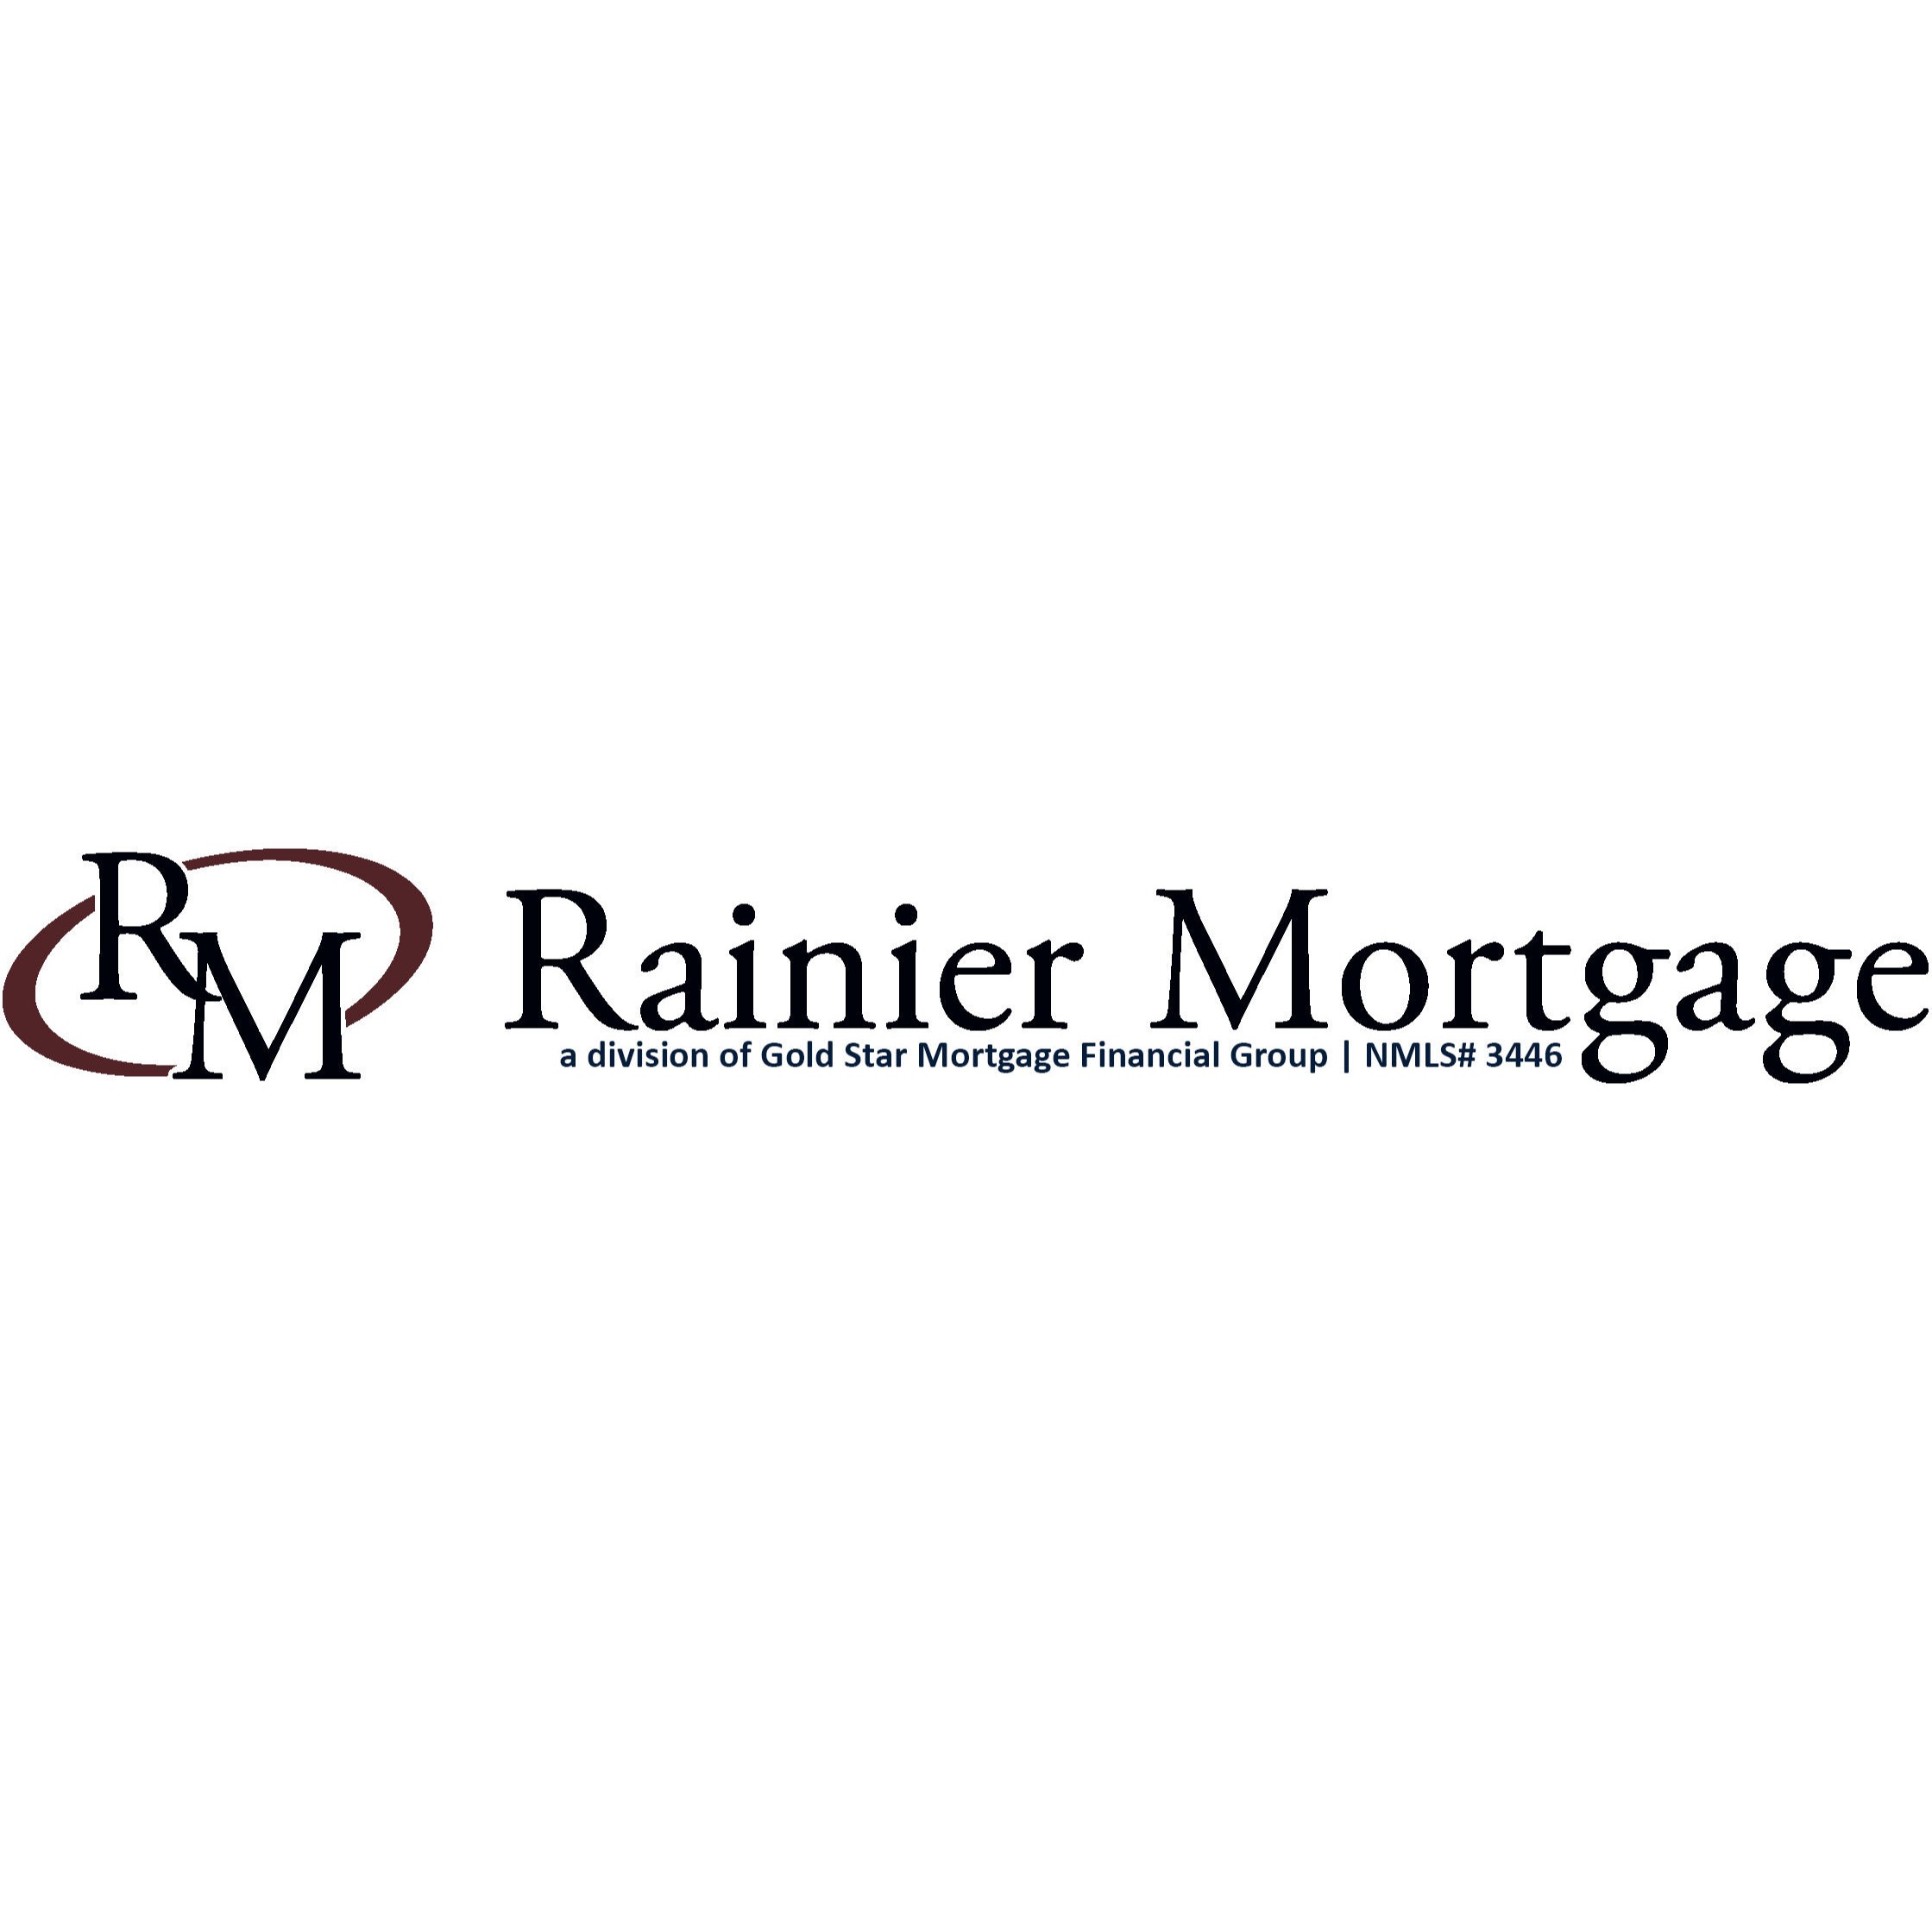 Kirk Shuler - Rainier Mortgage, a division of Gold Star Mortgage Financial Group